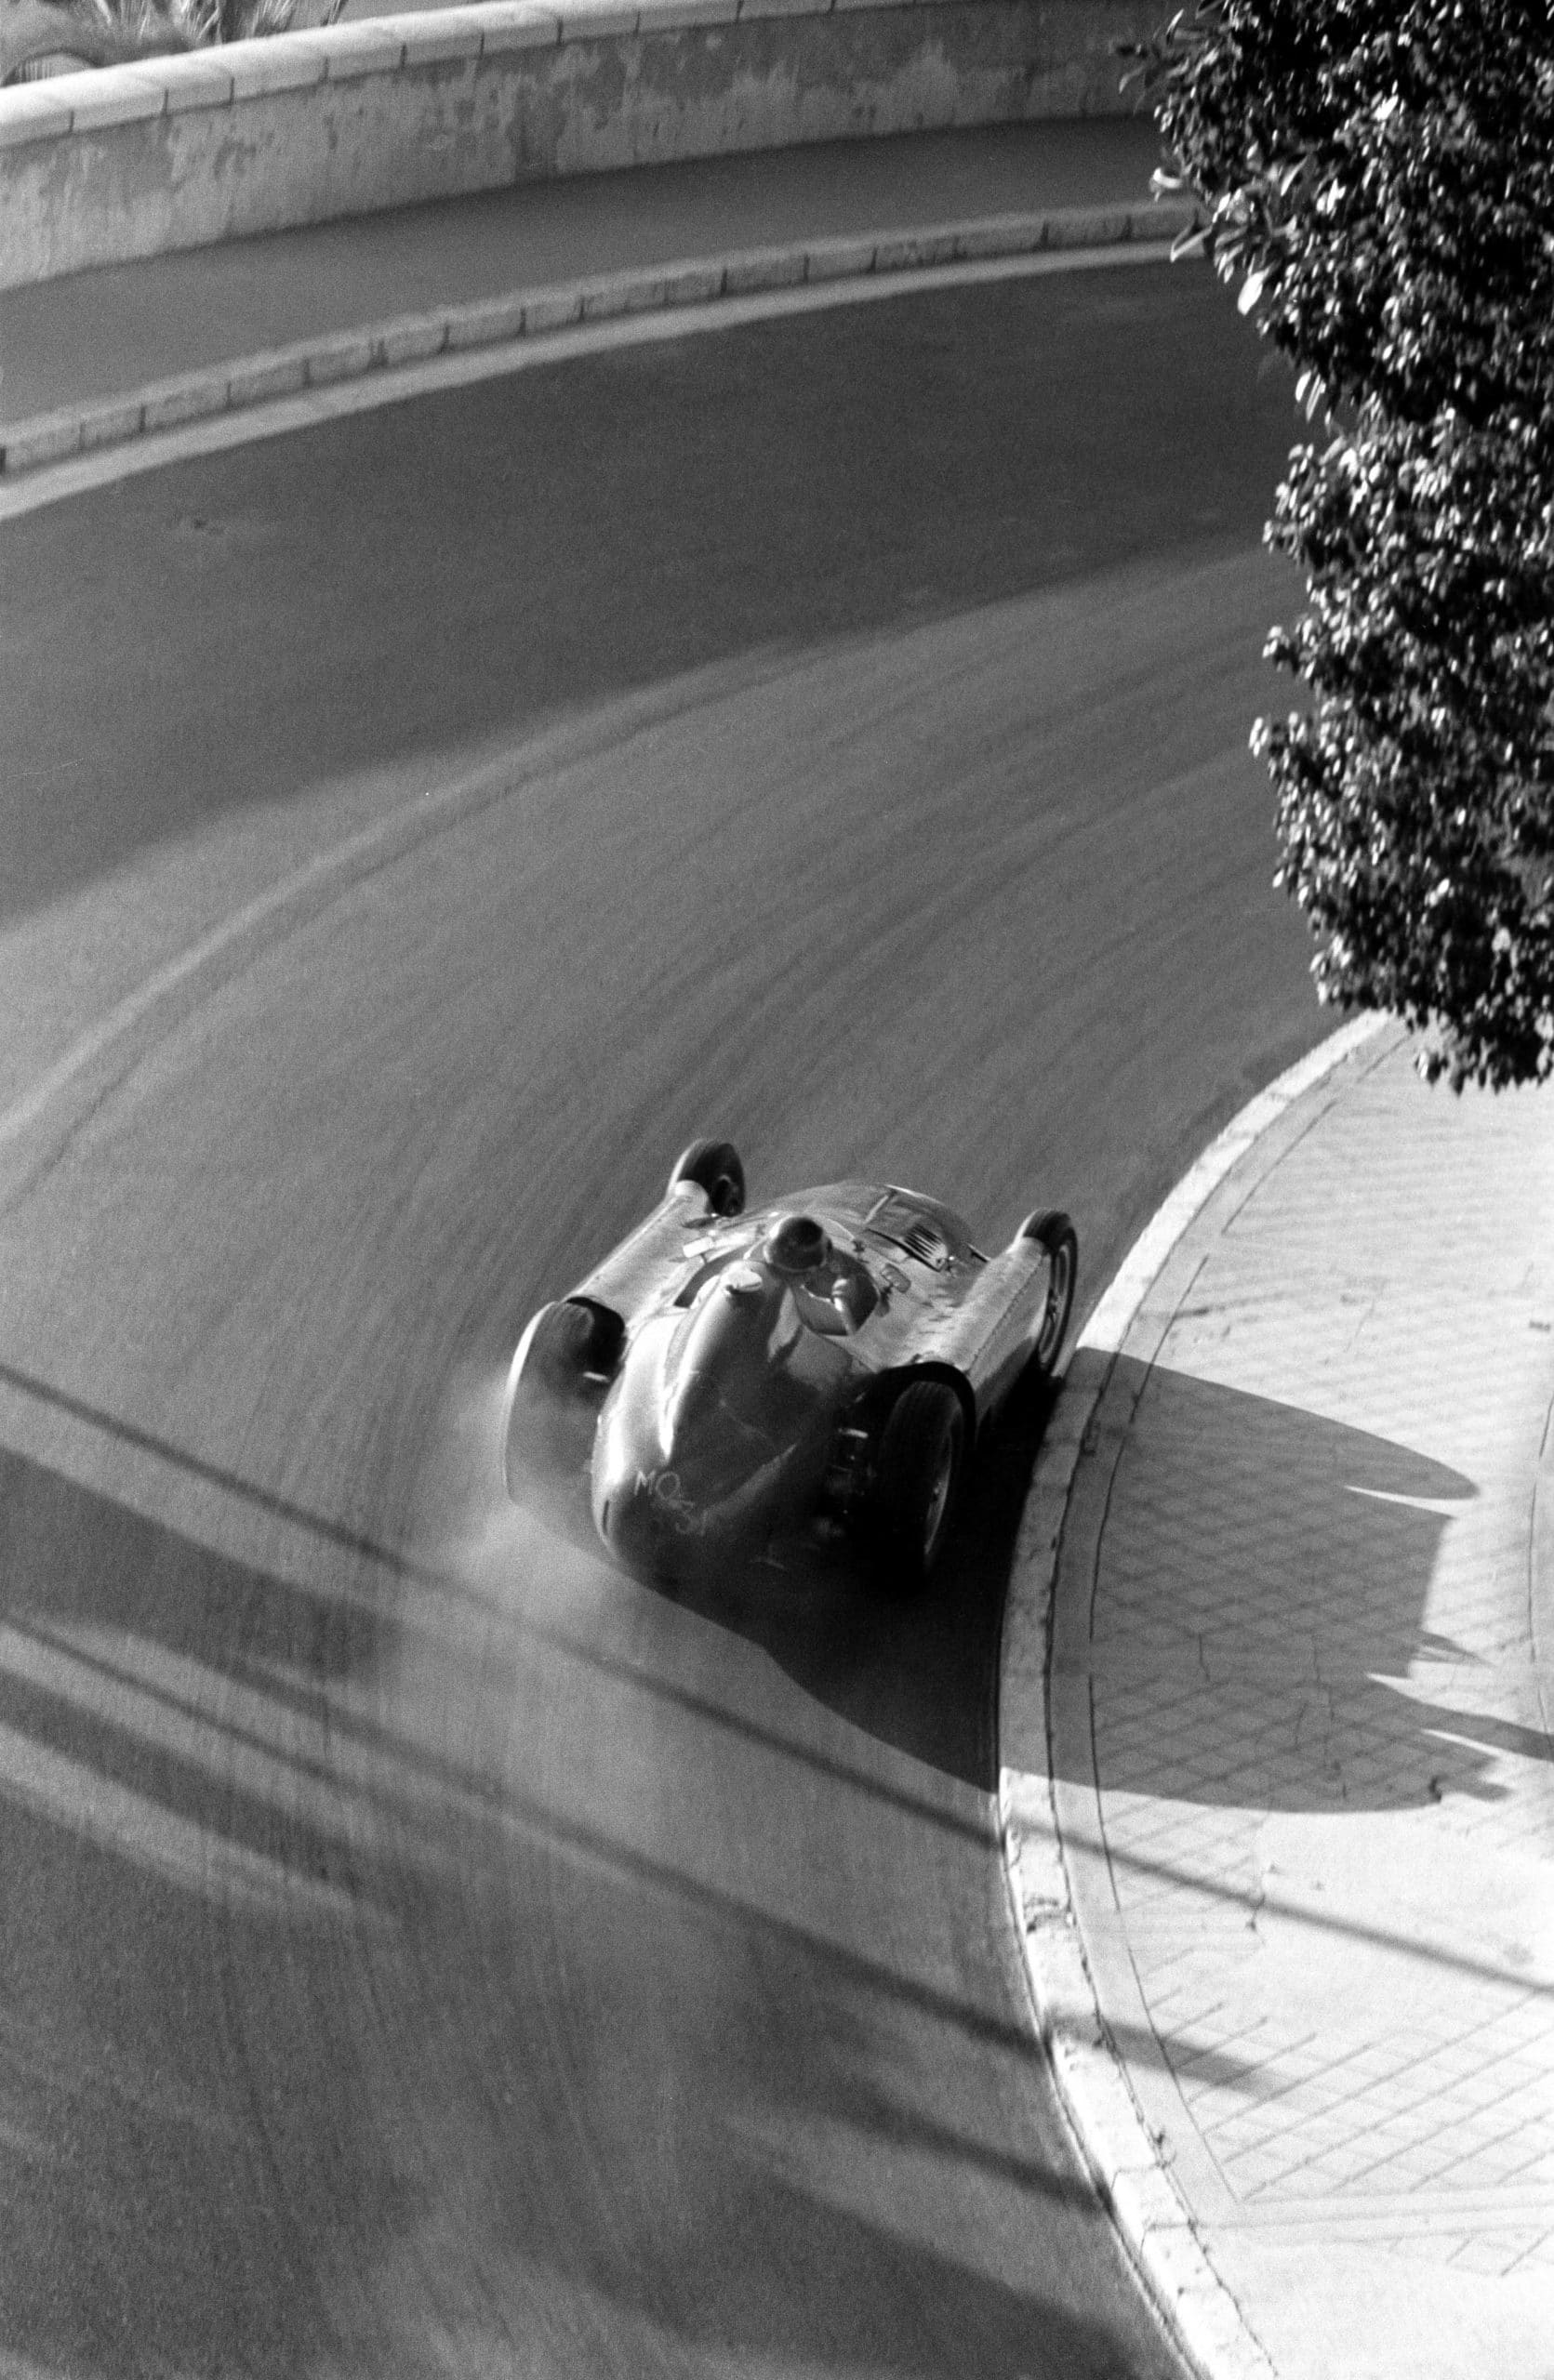 Juan Manuel Fangio of Argentina driving the #28 Scuderia Ferrari Lancia-Ferrari D50 Ferrari V8, drifts around Mirabeau during an early morning practice for the Monaco Grand Prix, Monte Carlo, 13th May 1956. (Photo by Klemantaski Collection/Getty Images)